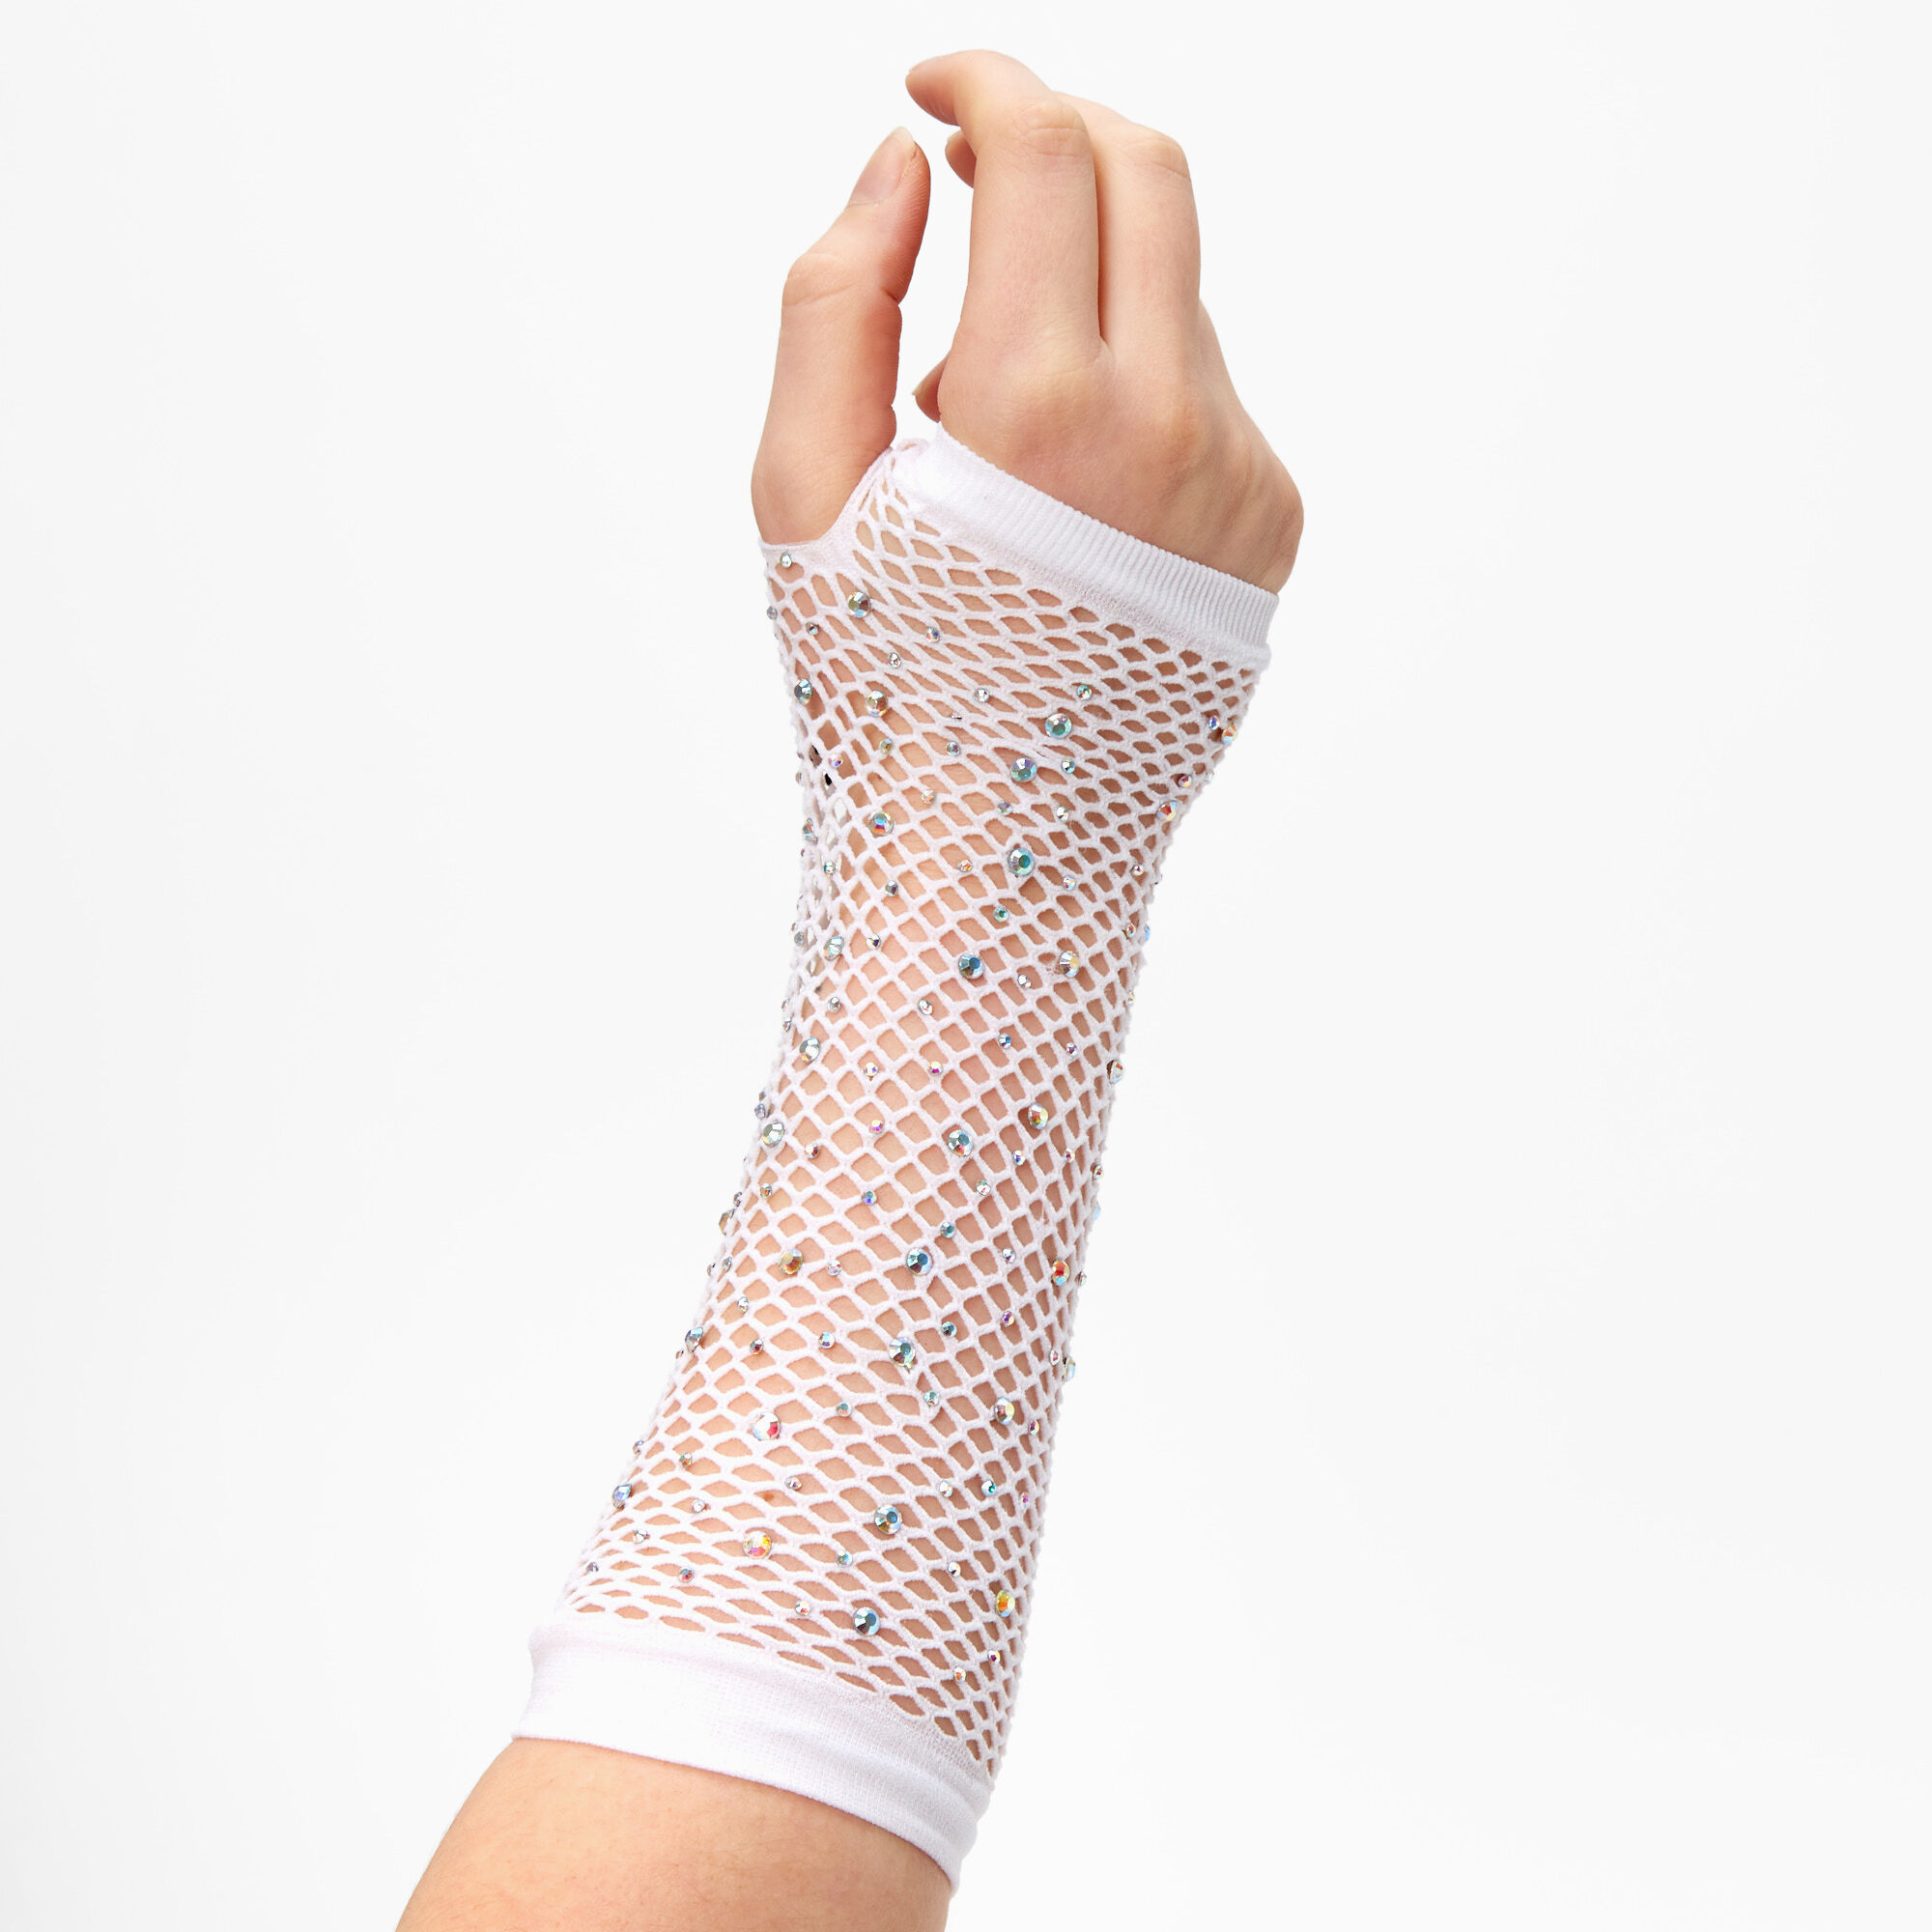 View Claires Rhinestone Fishnet Arm Warmers White information